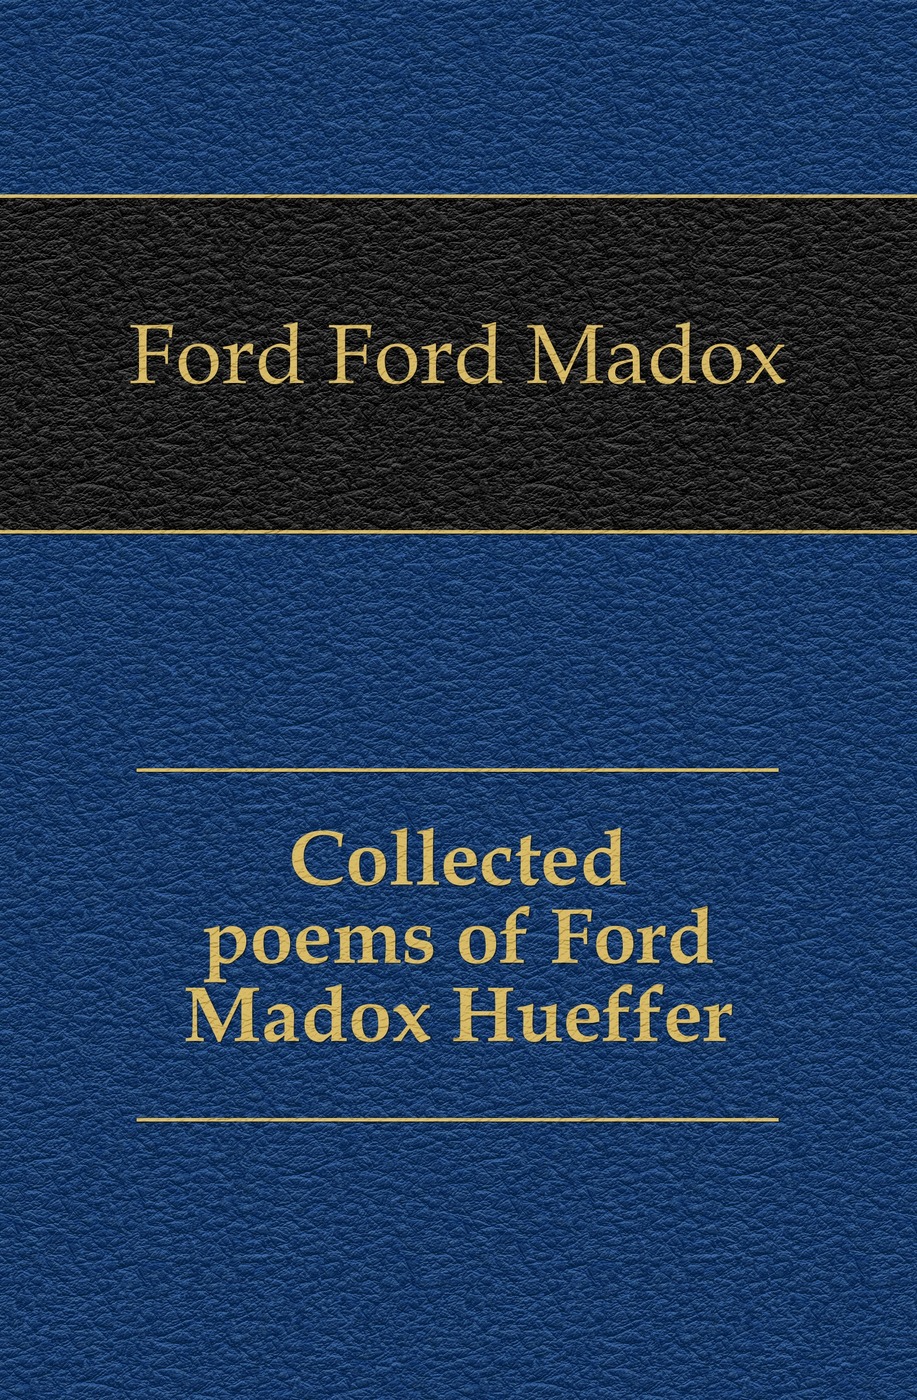 Collected poems of Ford Madox Hueffer